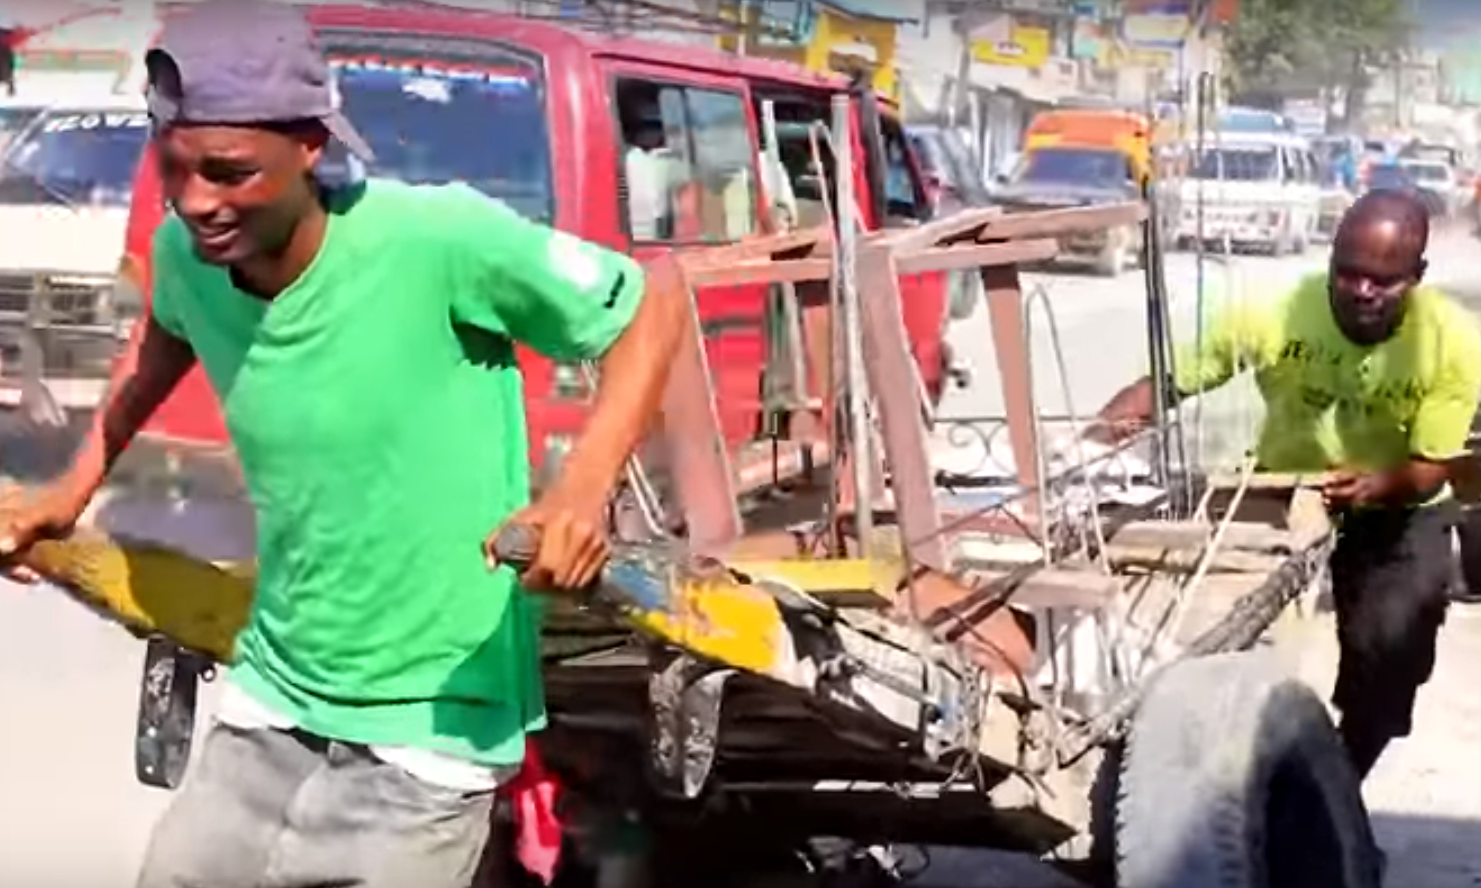 The Wheel Barrel Men of Haiti and Small Business Loans